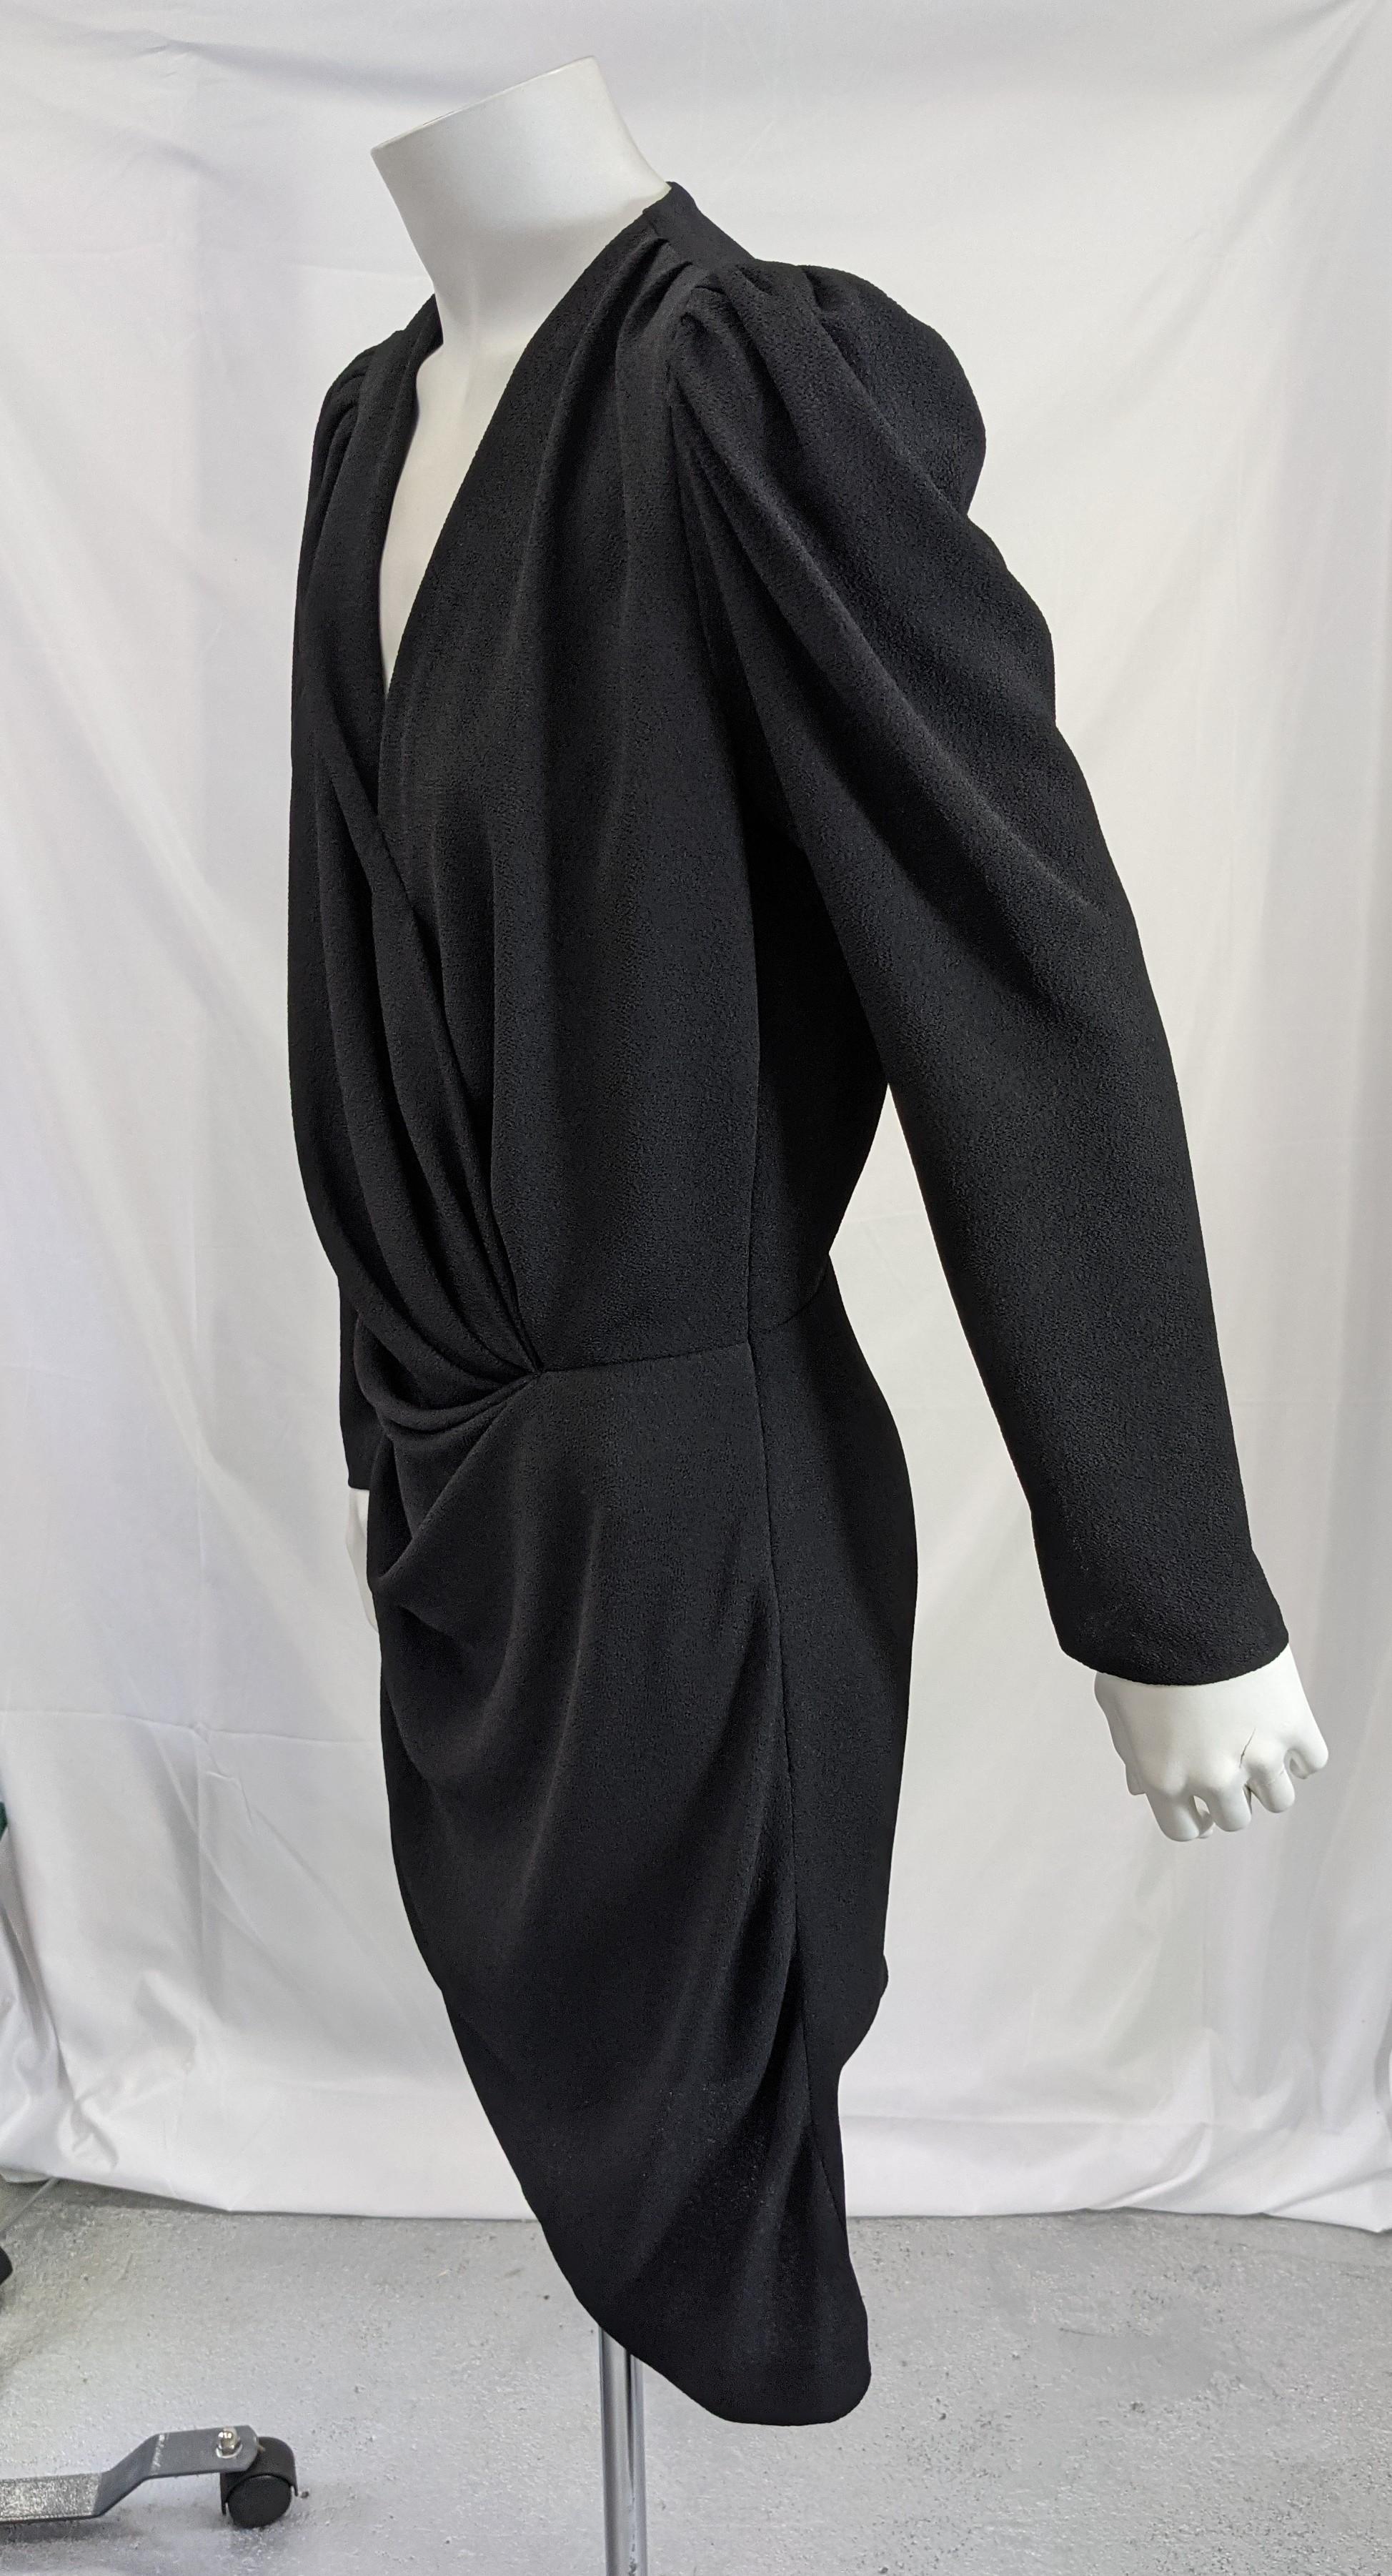 Elegant Balenciaga draped jersey dress in black with gathered side seams and slightly puffed sleeves. Pull over style with side zip closure, designed as draped faux wrap dress. 
Please note mannequin is too small for dress so it isnt laying